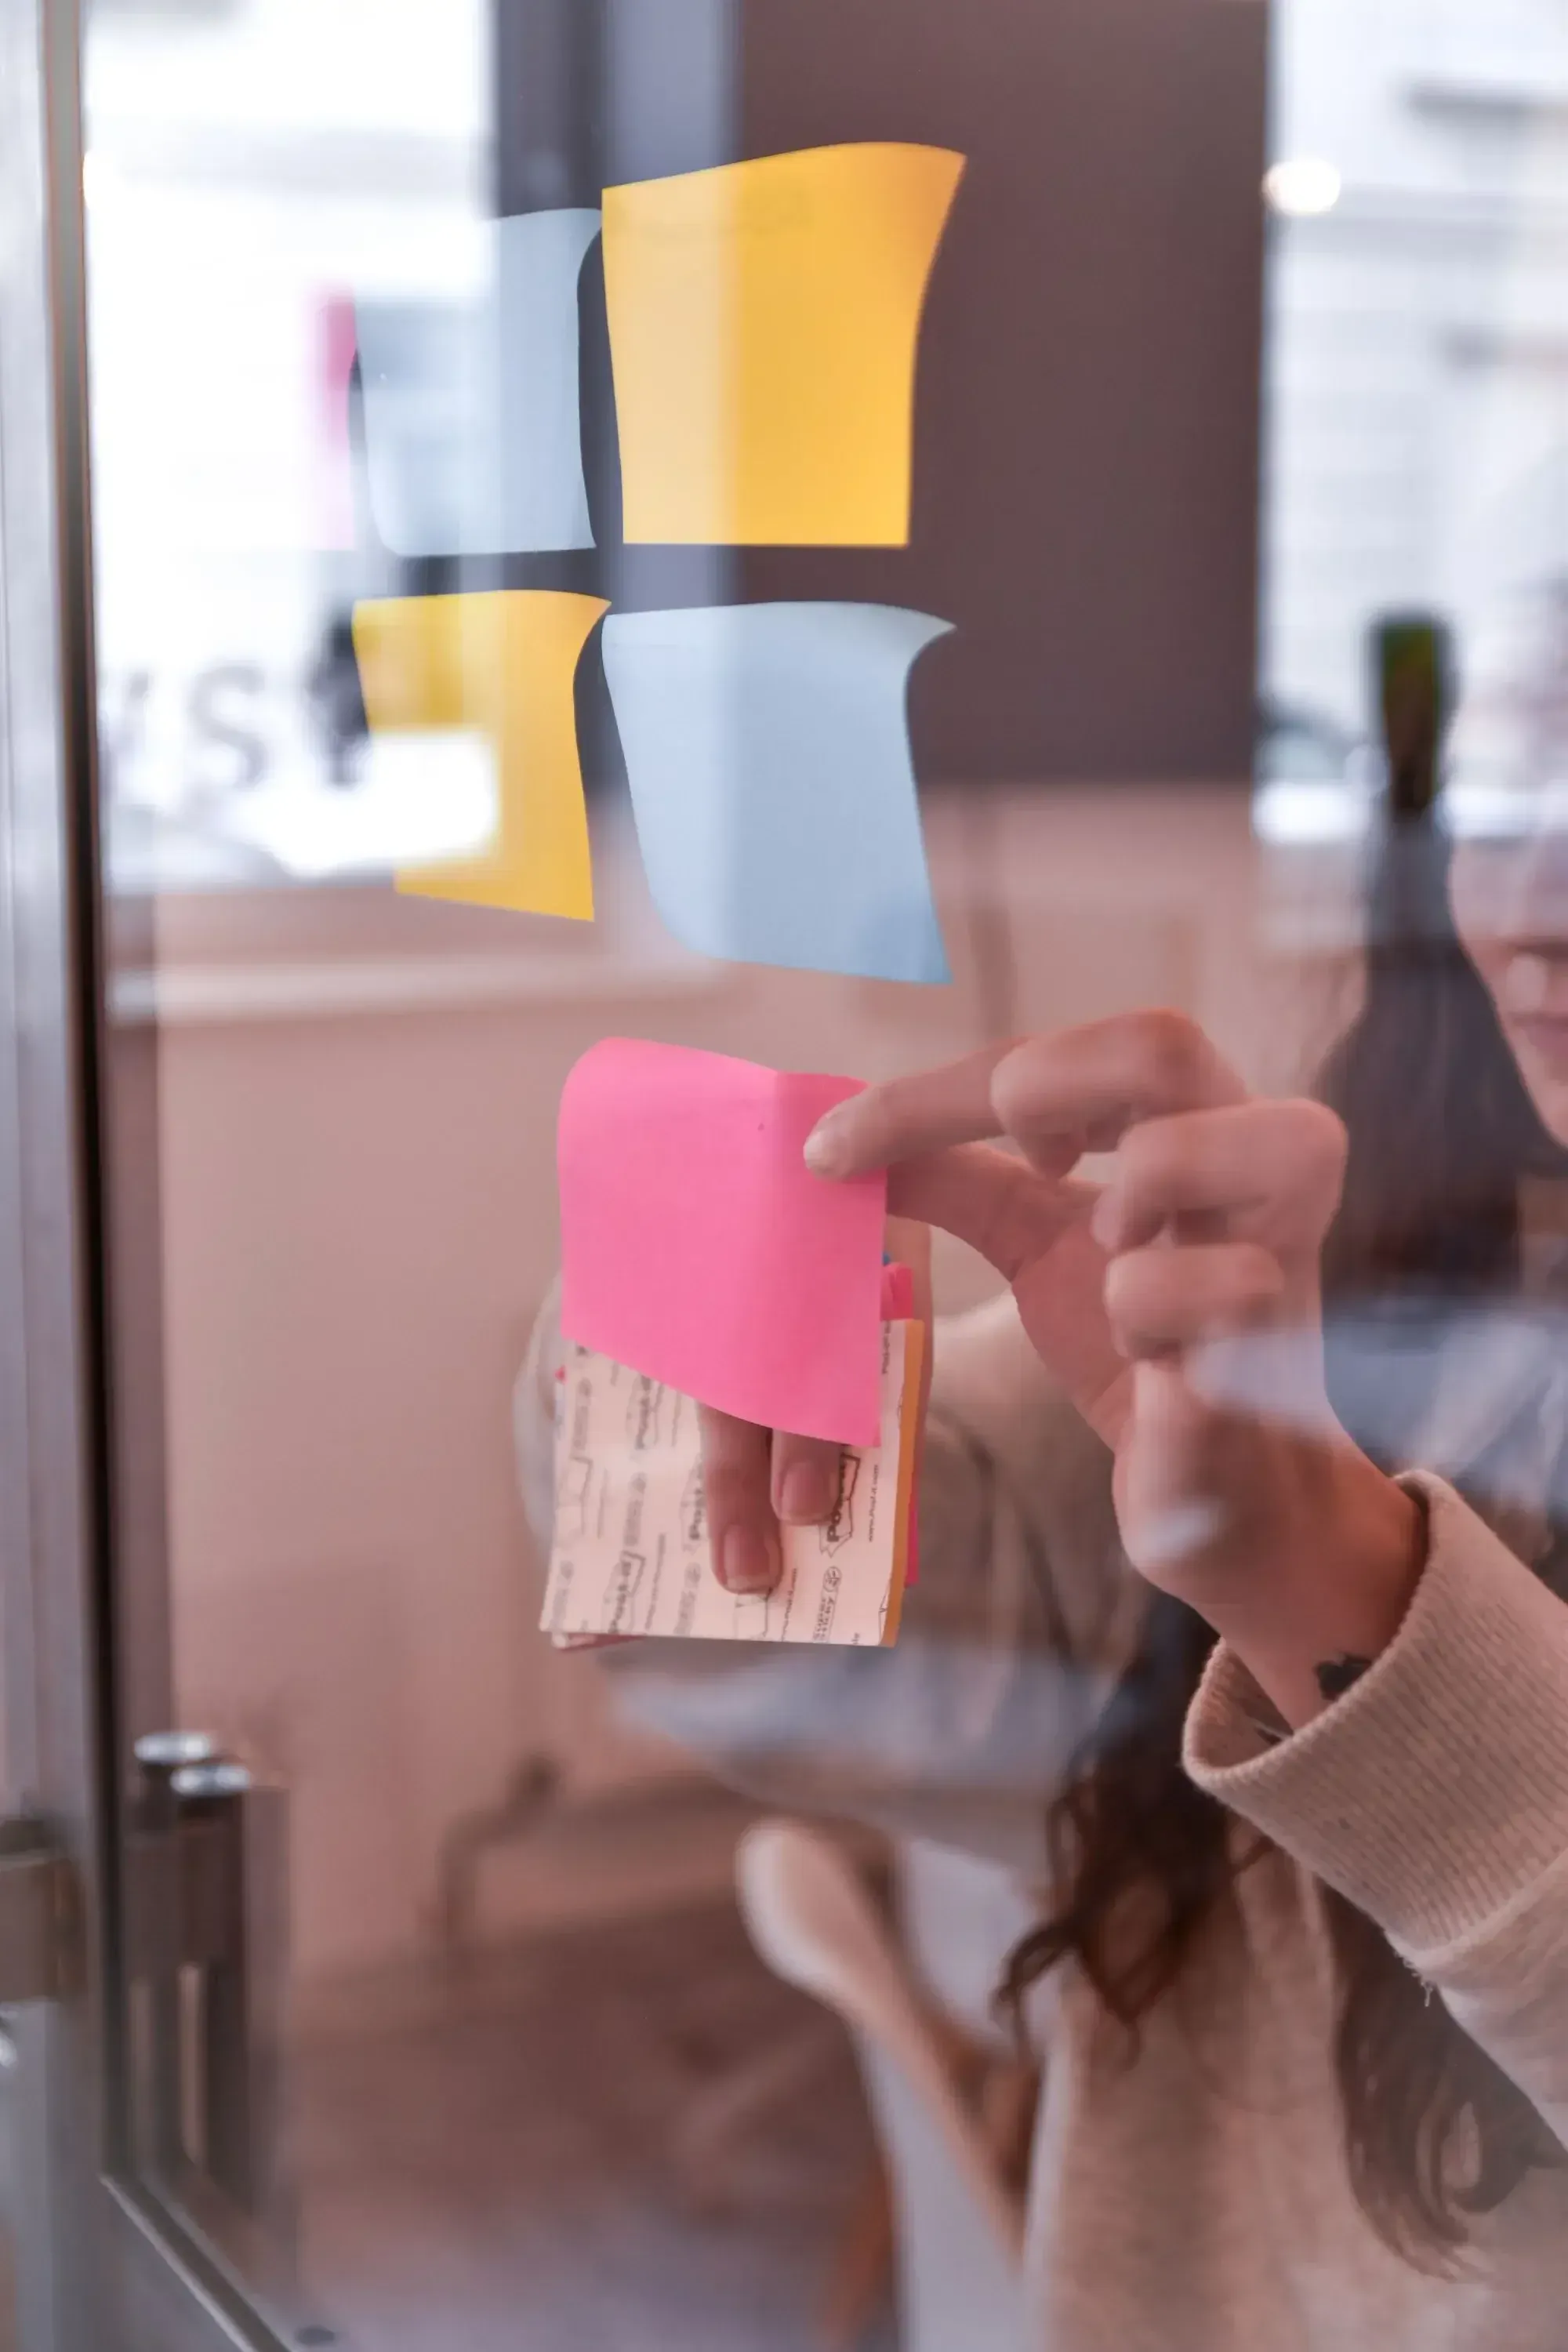 Woman with long brown hair and beige jumper sticks colourful post-its on a glass wall.